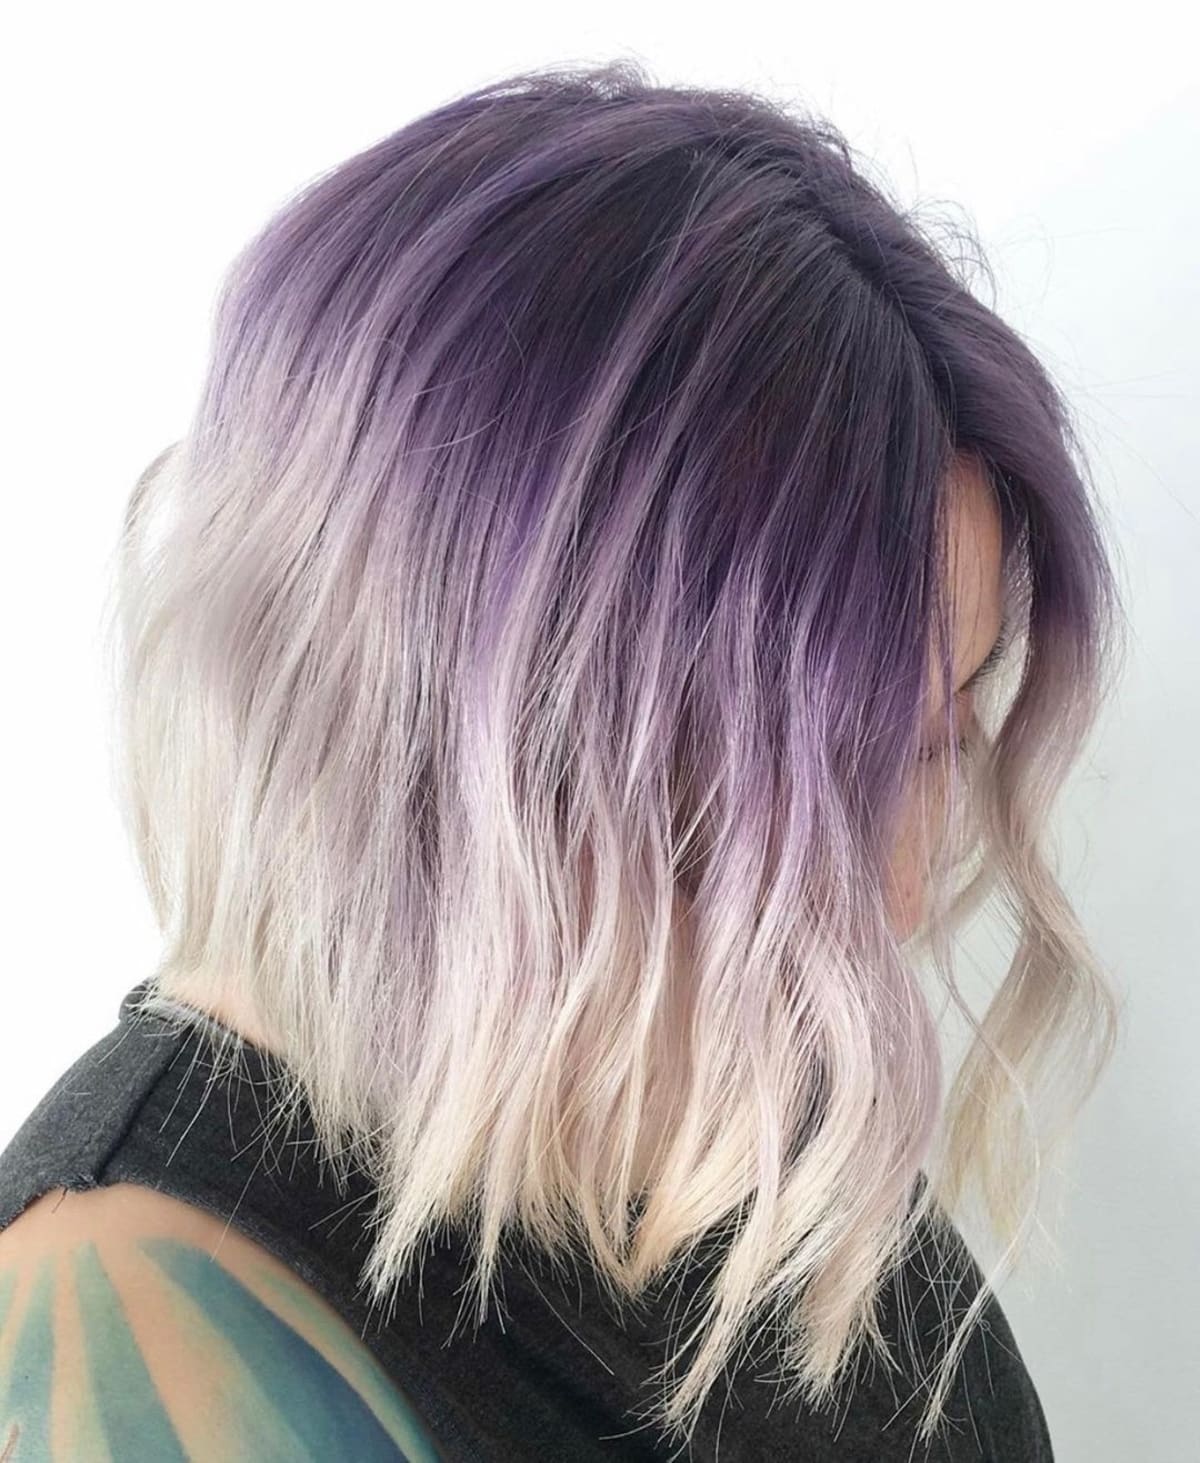 Plum roots on blonde hair